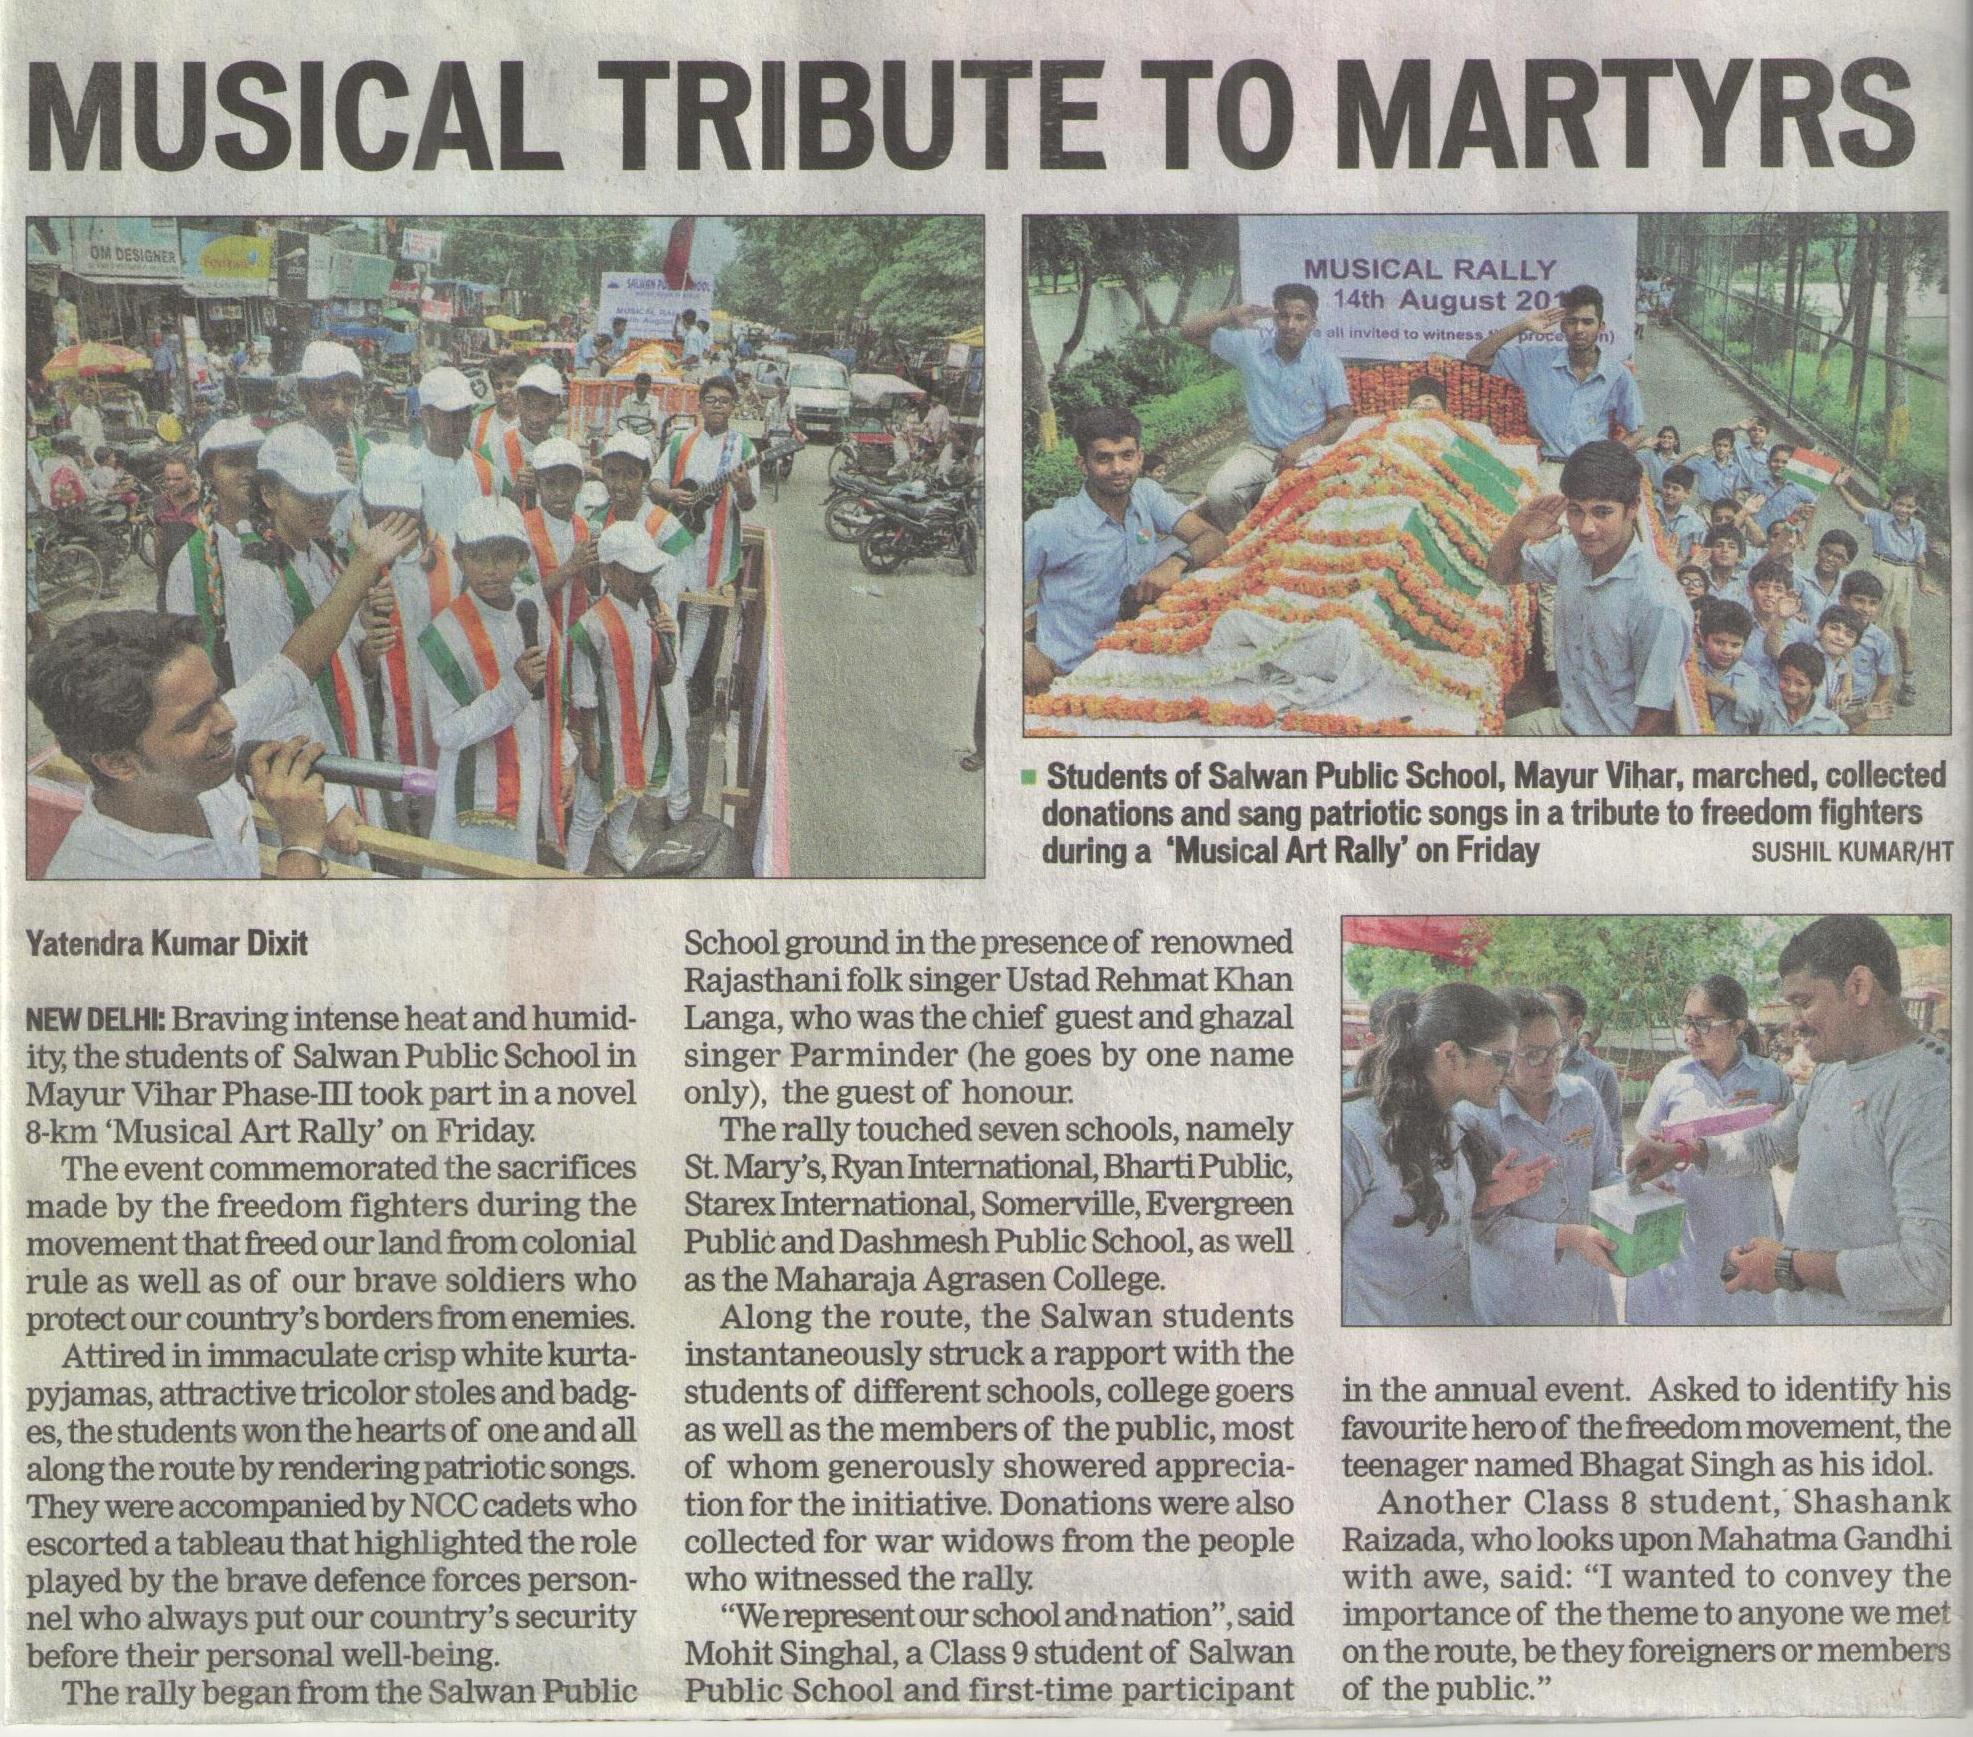 Musical Tribute to Martyrs